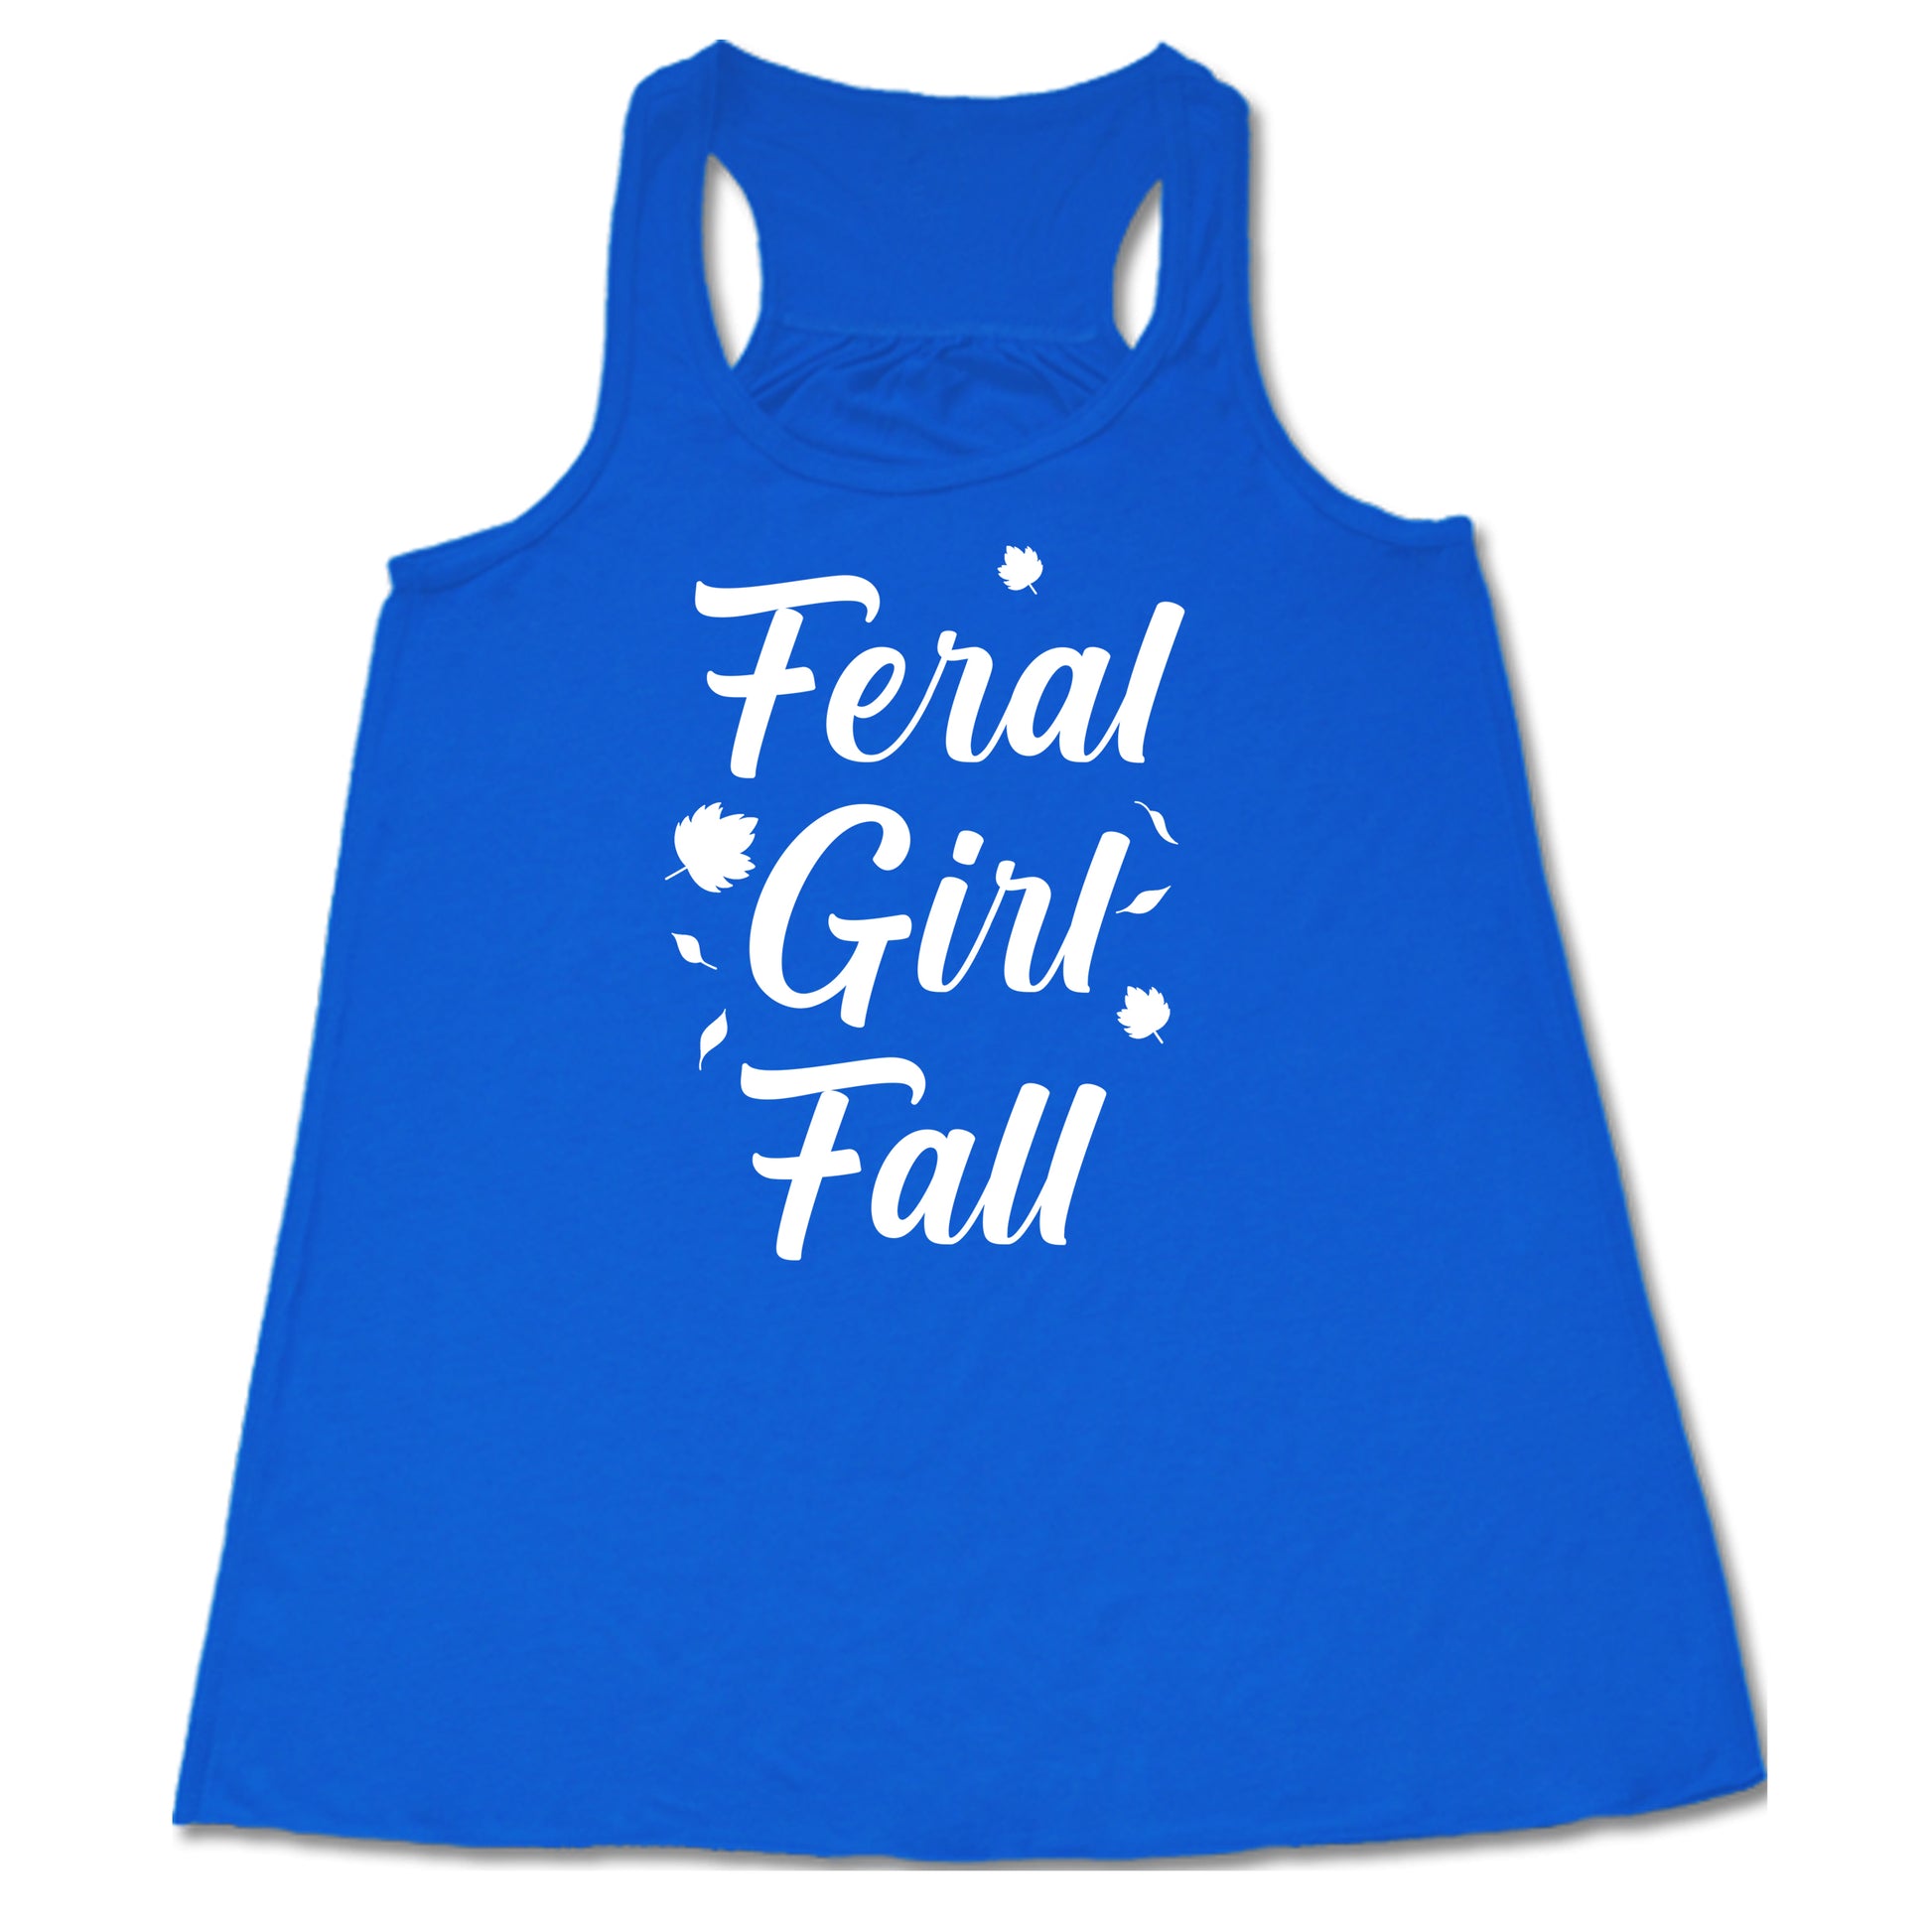 white quote "Feral Girl Fall" on a blue racerback shirt